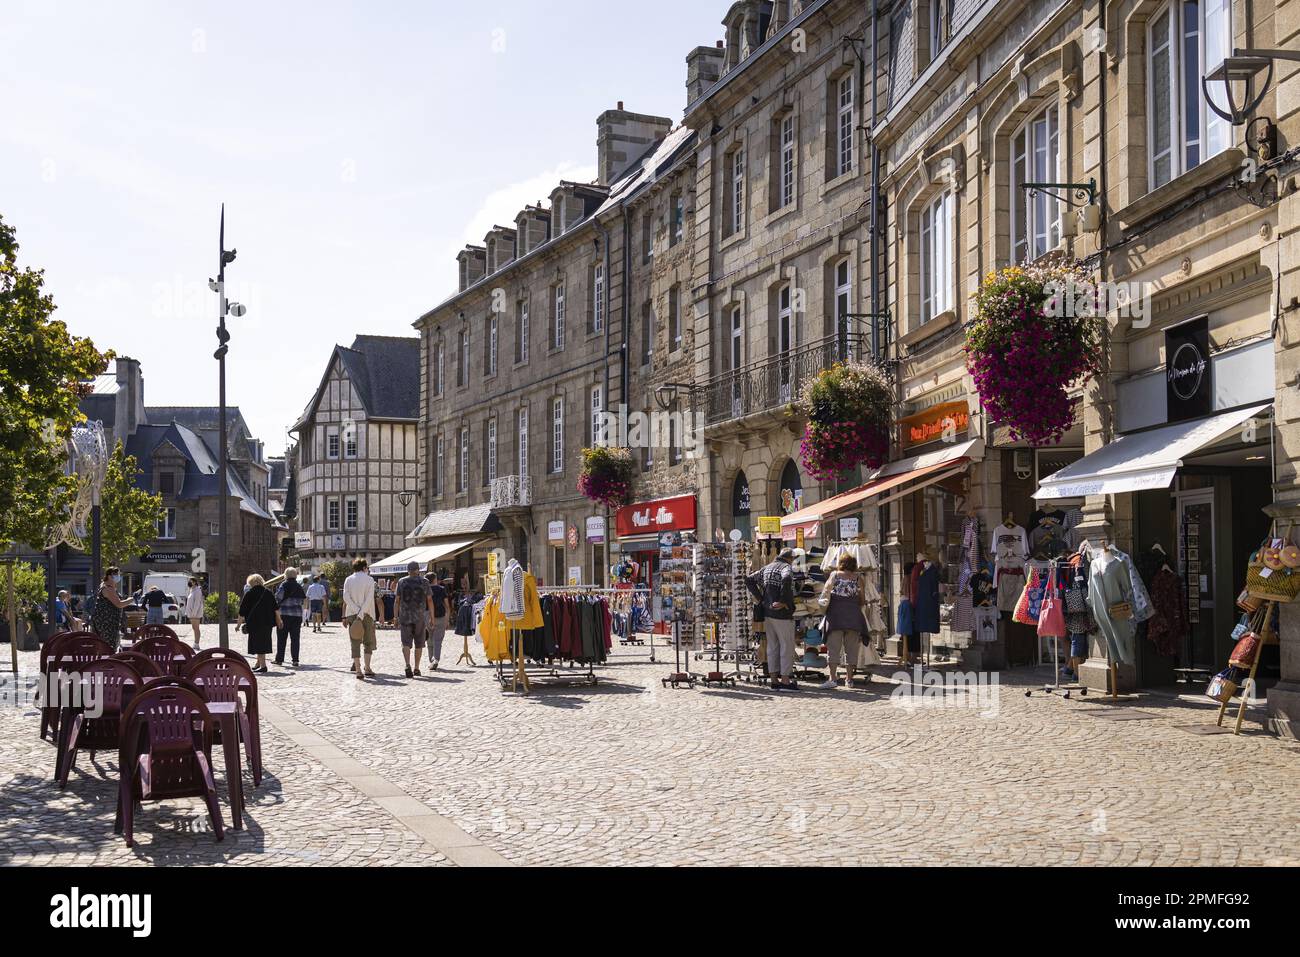 France, Cotes d'Armor, Paimpol, Martray square on a summer day Stock Photo